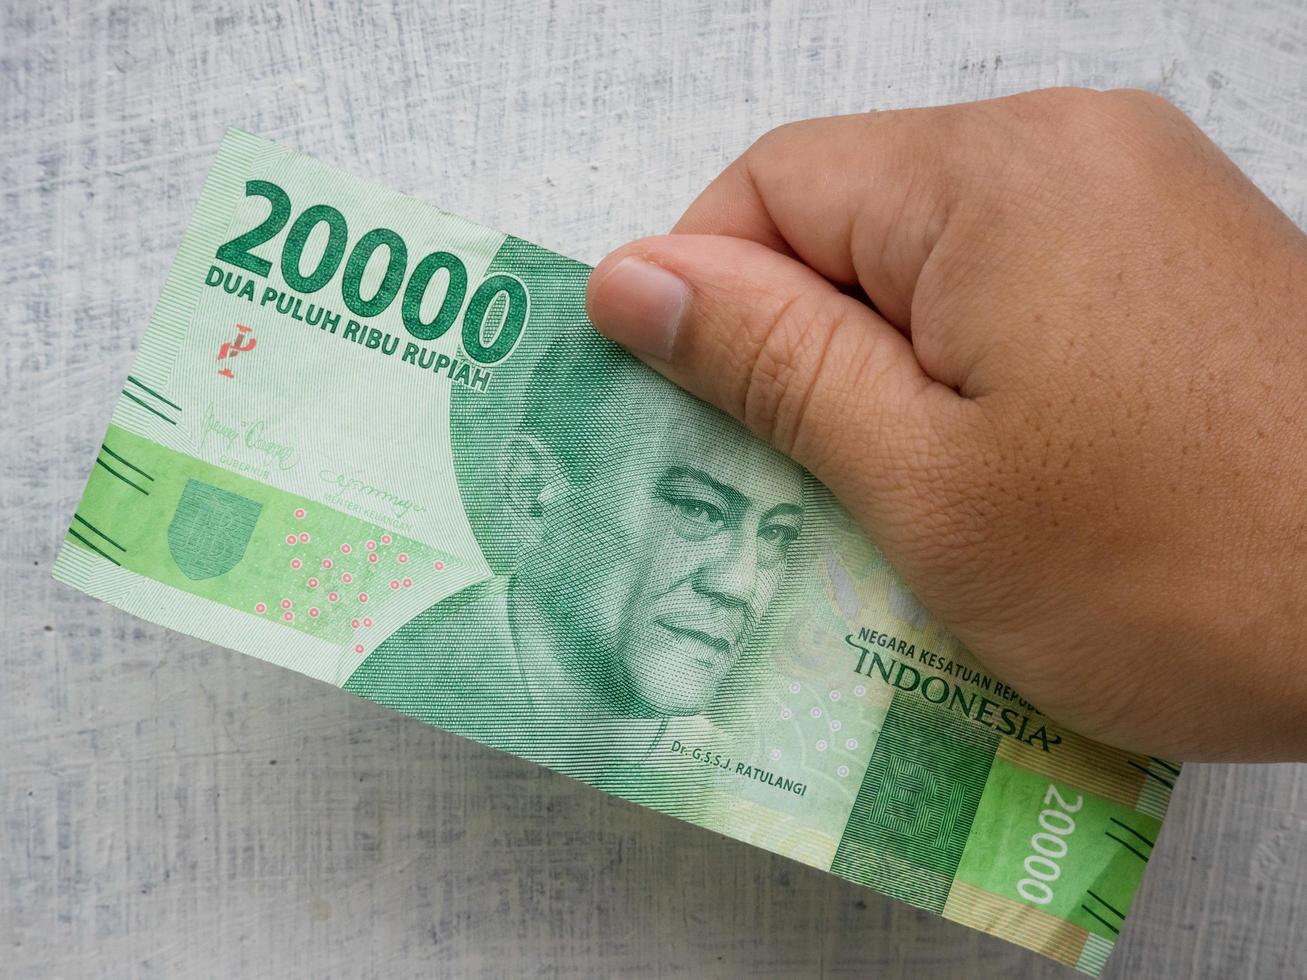 Hold the twenty thousand rupiah denomination in Indonesian currency photo